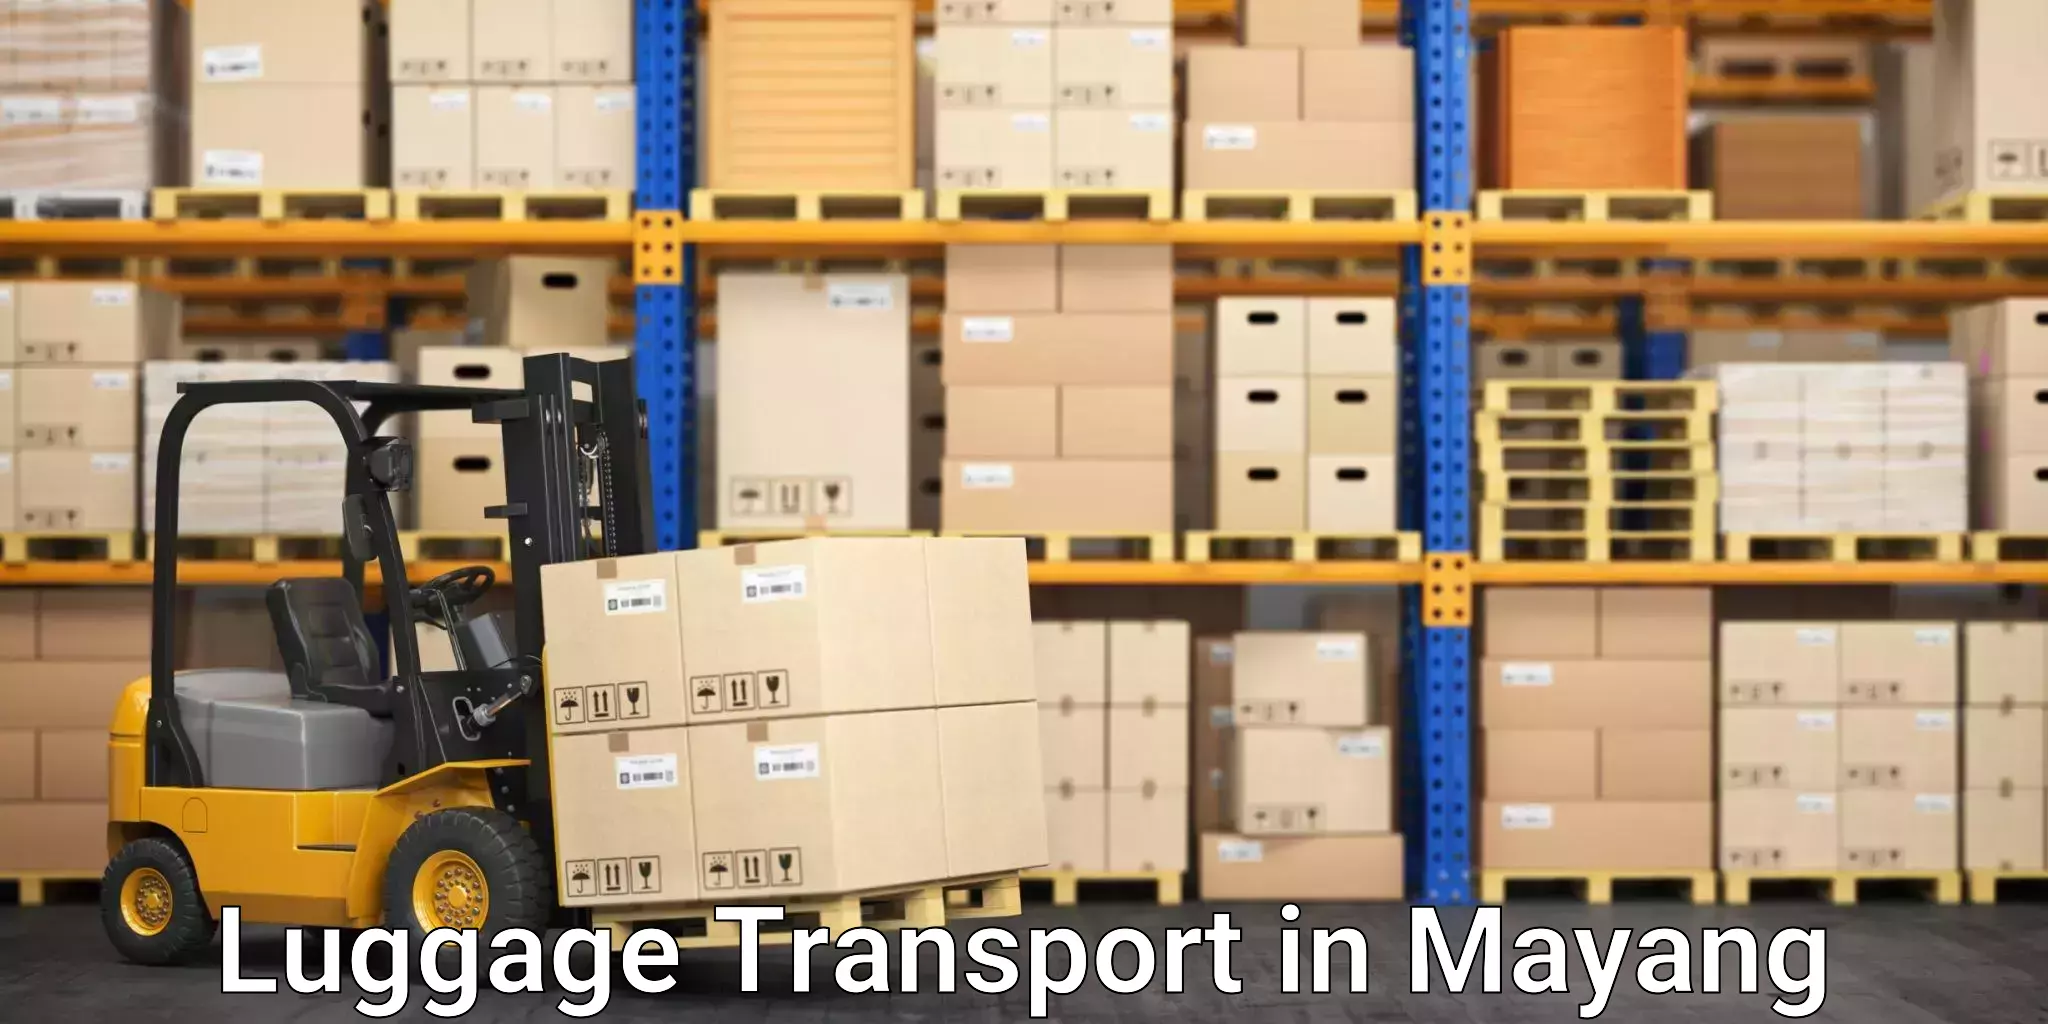 Luggage shipping trends in Mayang